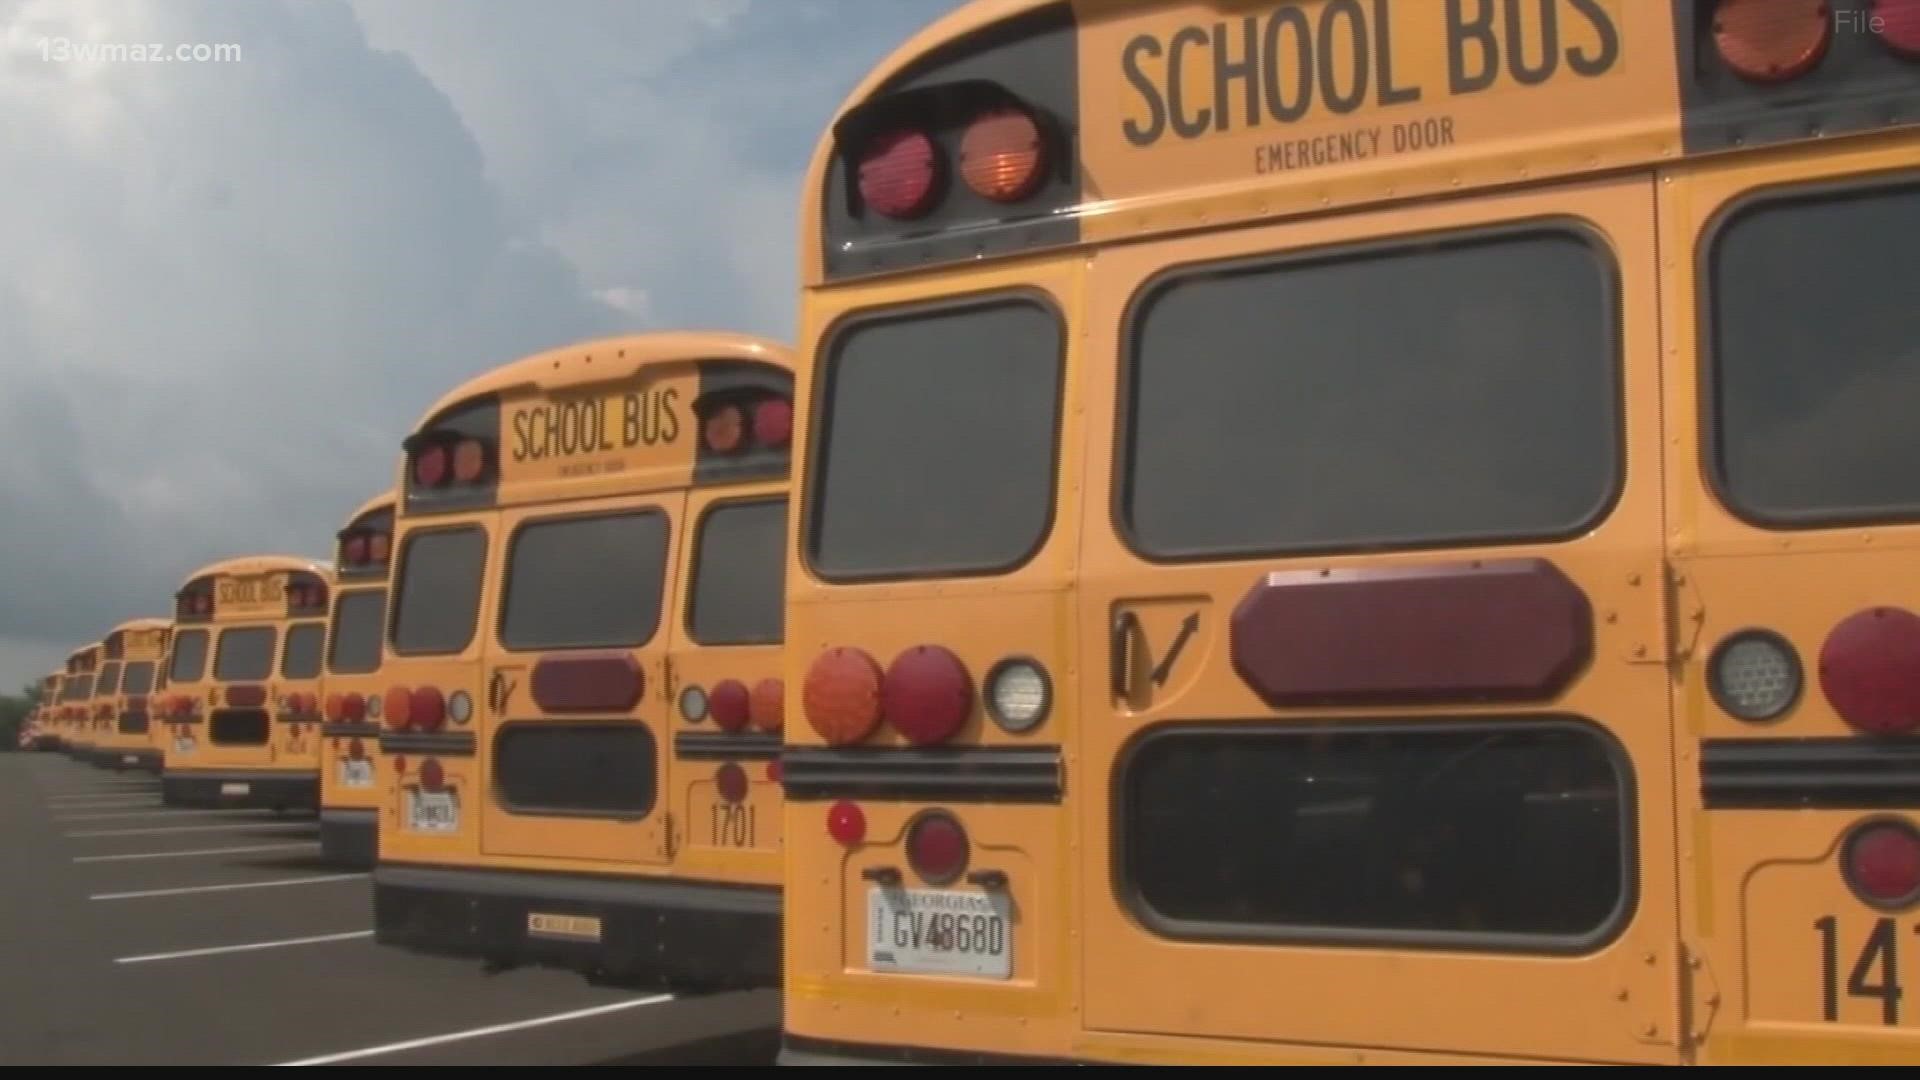 The Hillcrest Elementary student was charged after officers found the gun hidden aboard the bus